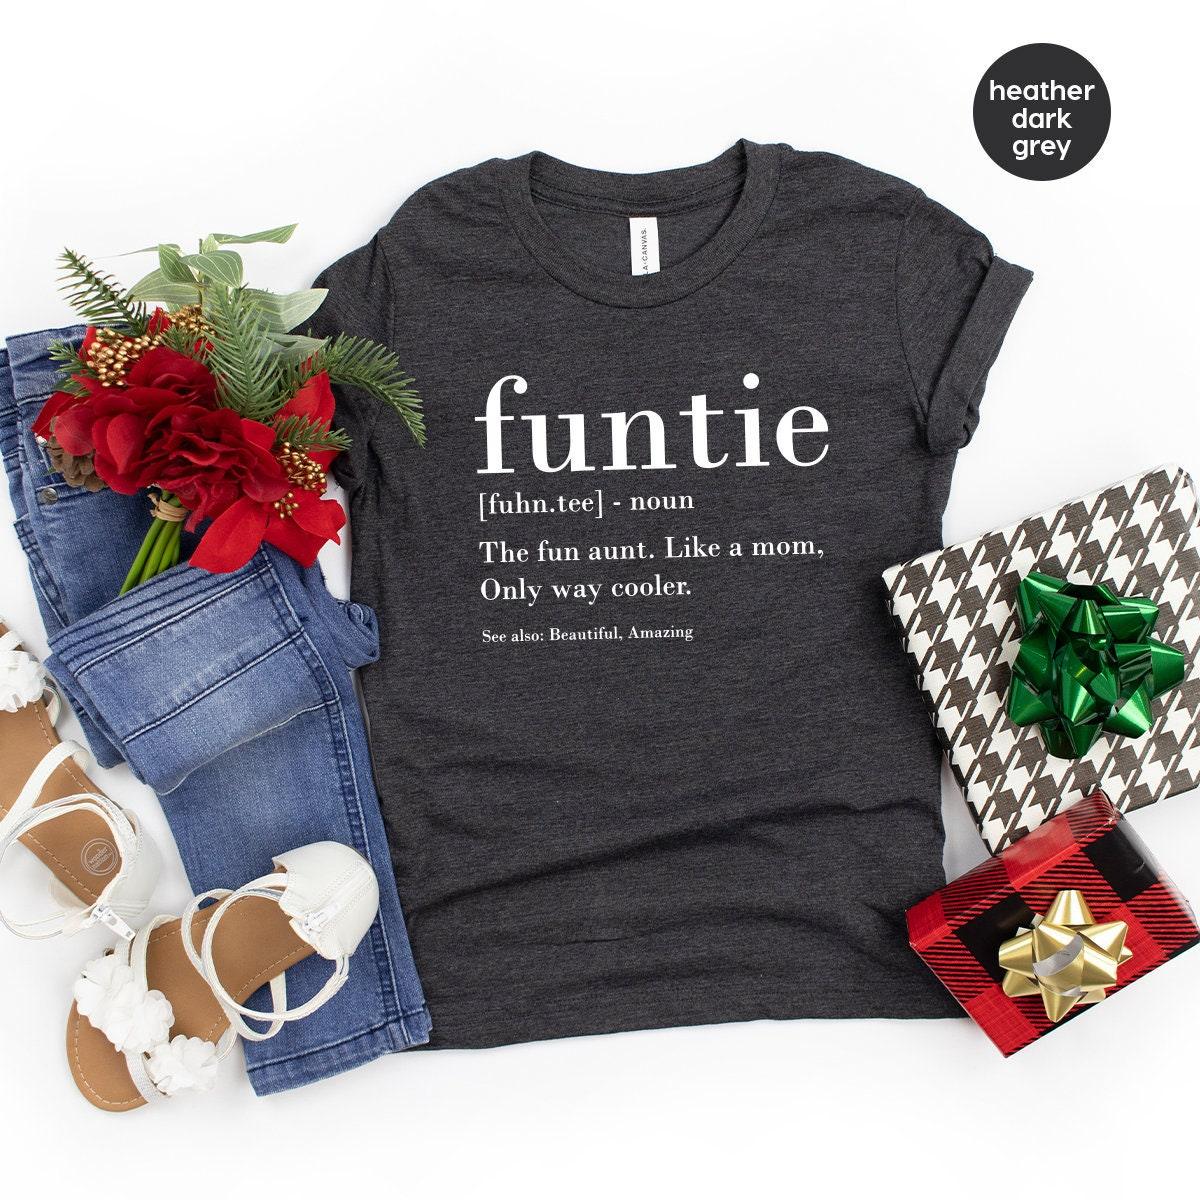 Aunt TShirt, Auntie T Shirt, Funtie Shirt, Funtie Definition Shirt,  Mother's Day Gifts, The Fun Aunt Like Mom Only Way Cooler Tee - Fastdeliverytees.com